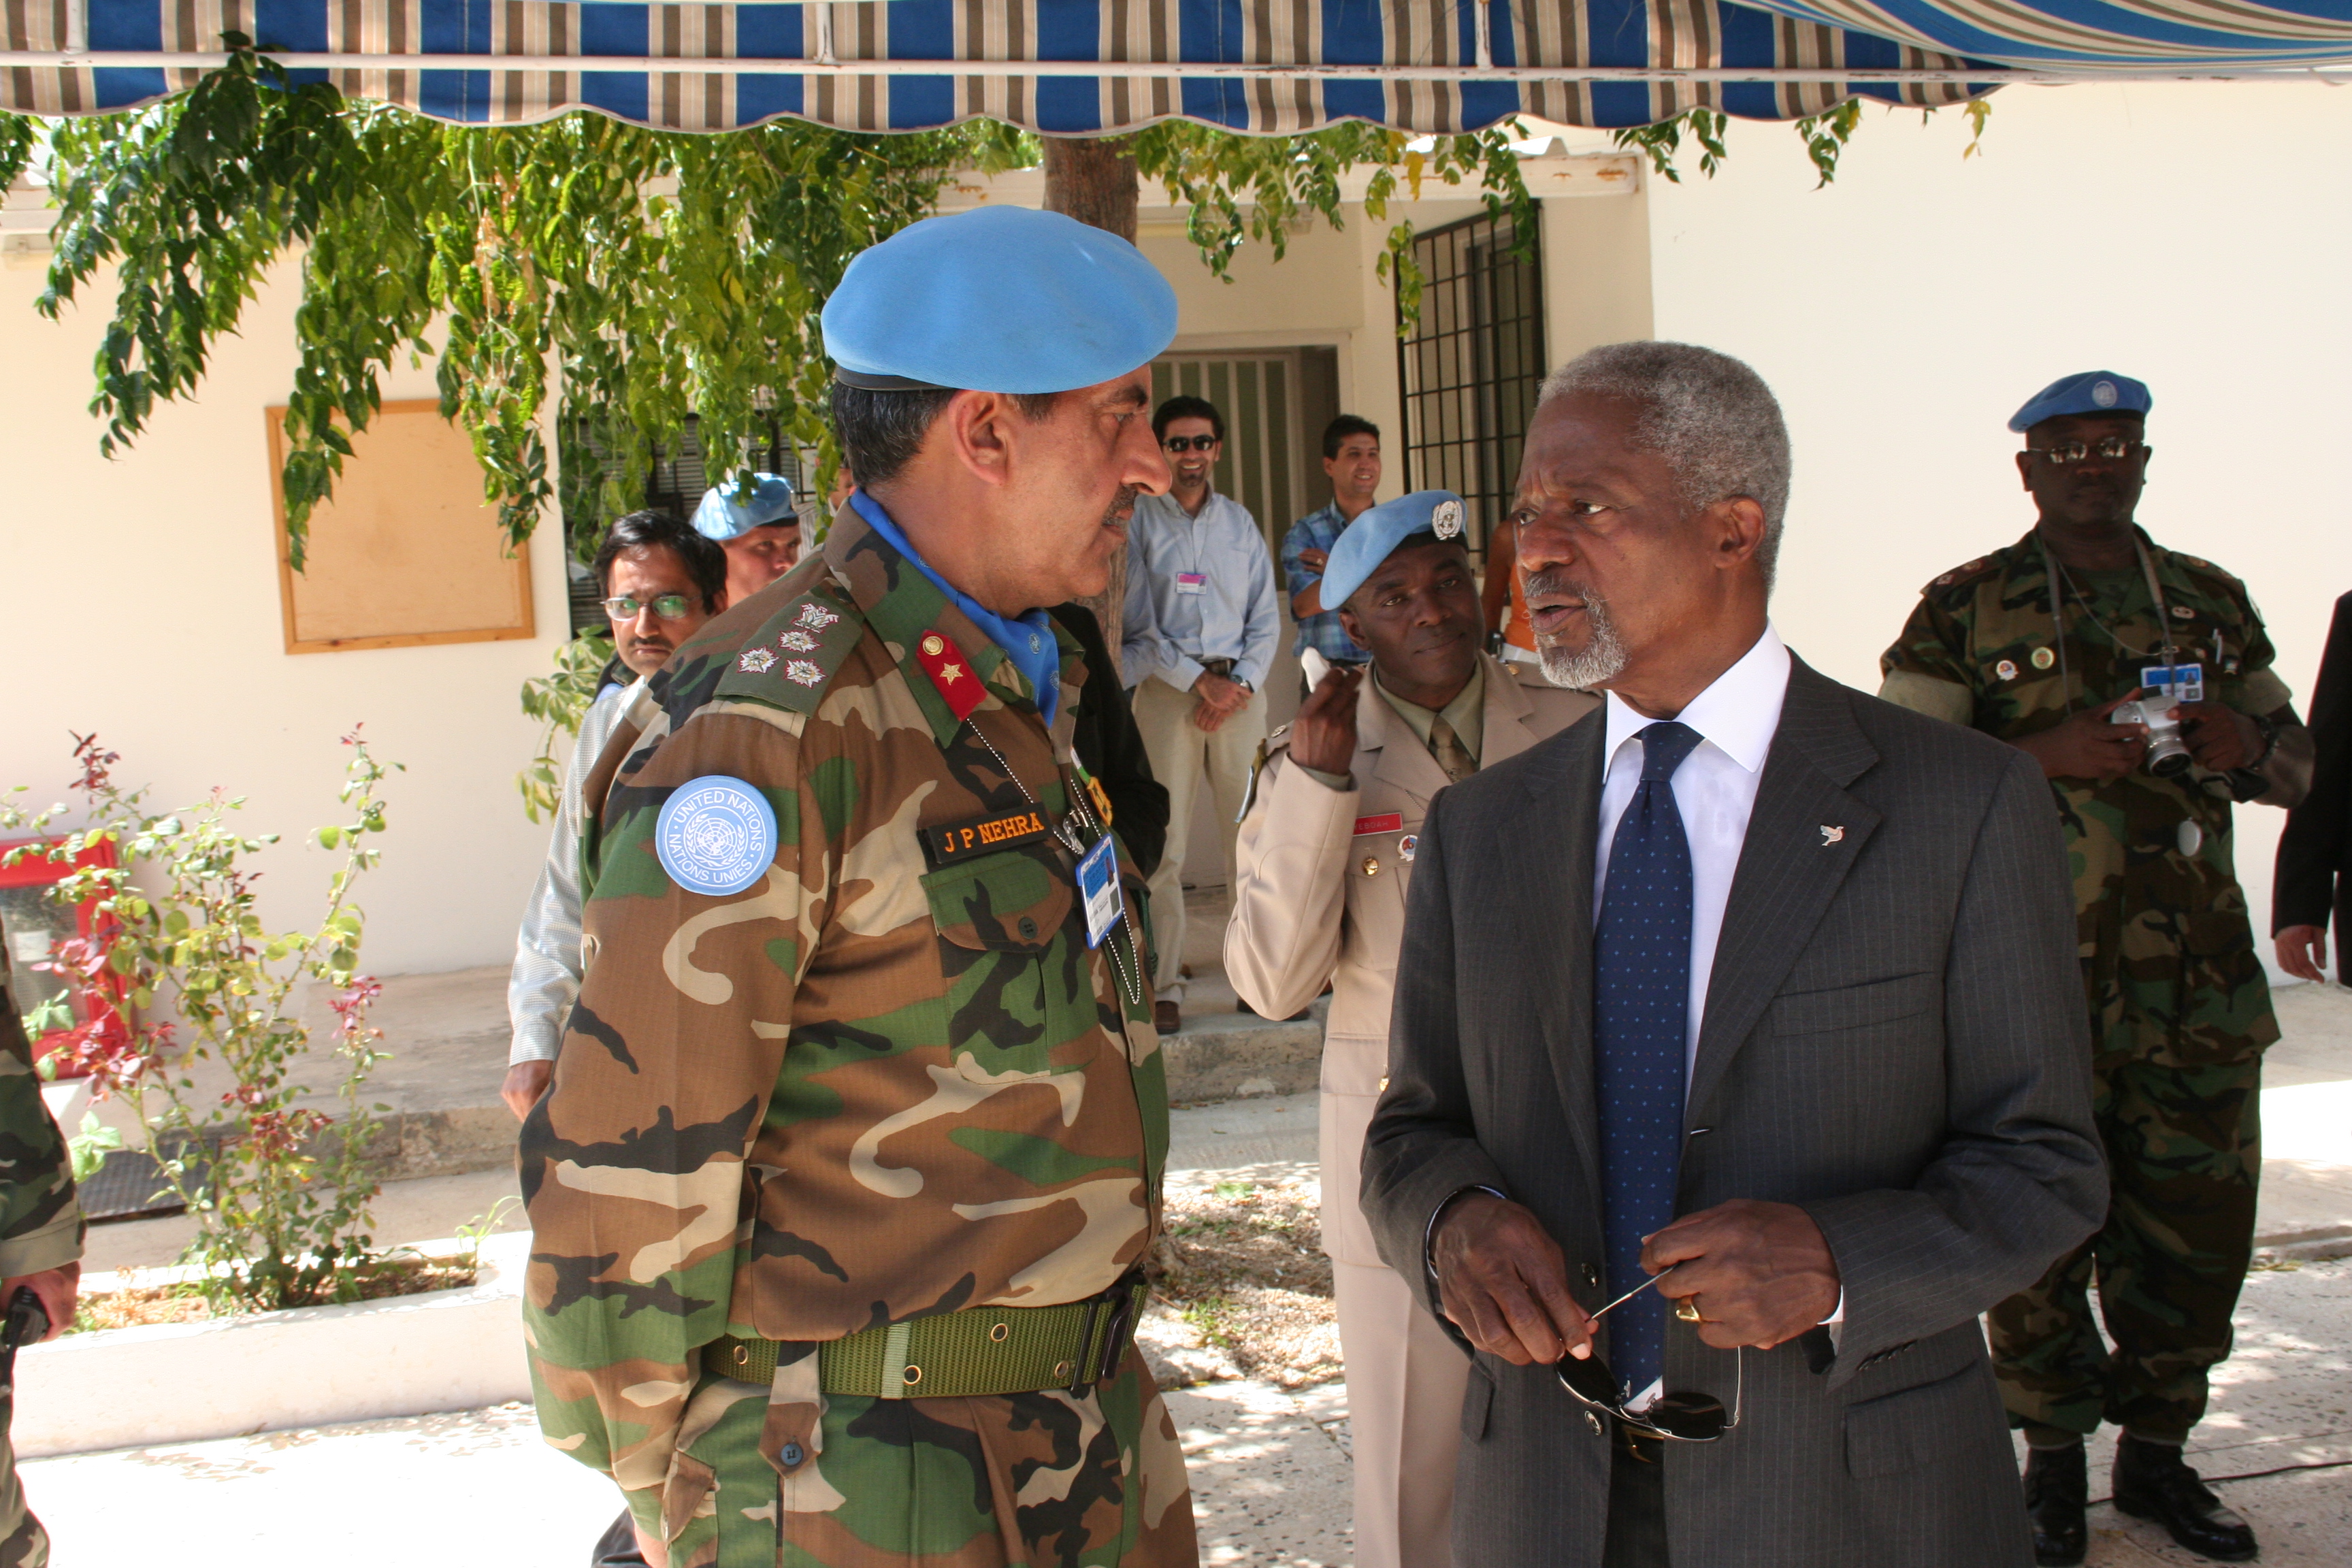 In Discussion with UN Secy Gen Mr Kofi Annan on the Latters visit to UNIFIL soon after the 2006 Israel Hezbollah Conflict 29 Aug 2006